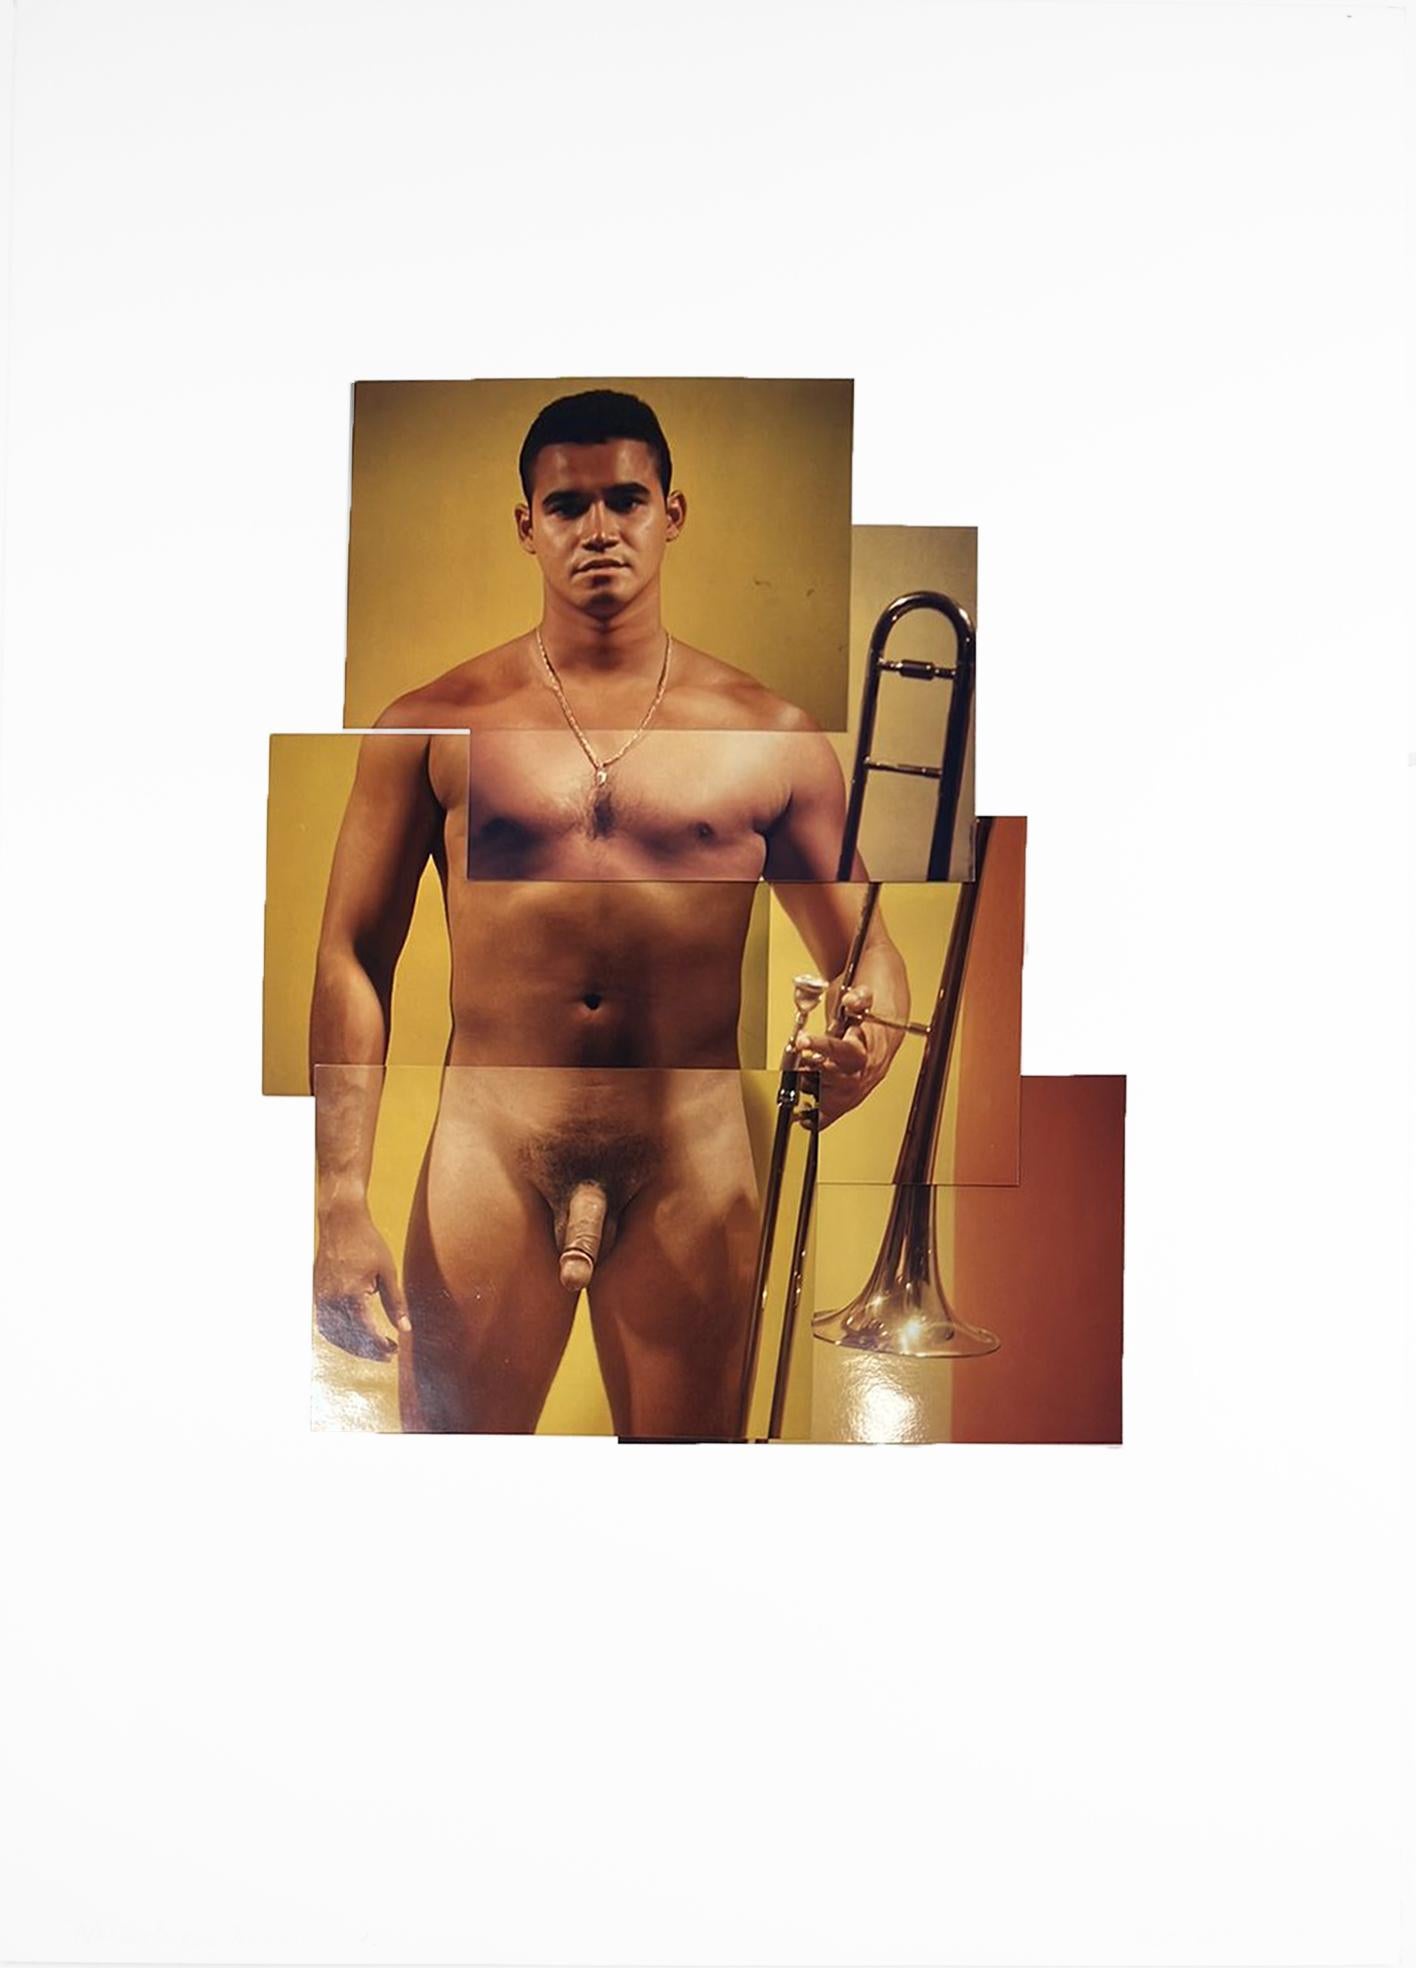 Norberto con Trombón. From The Vendedores series, Photo Collage Mixed media